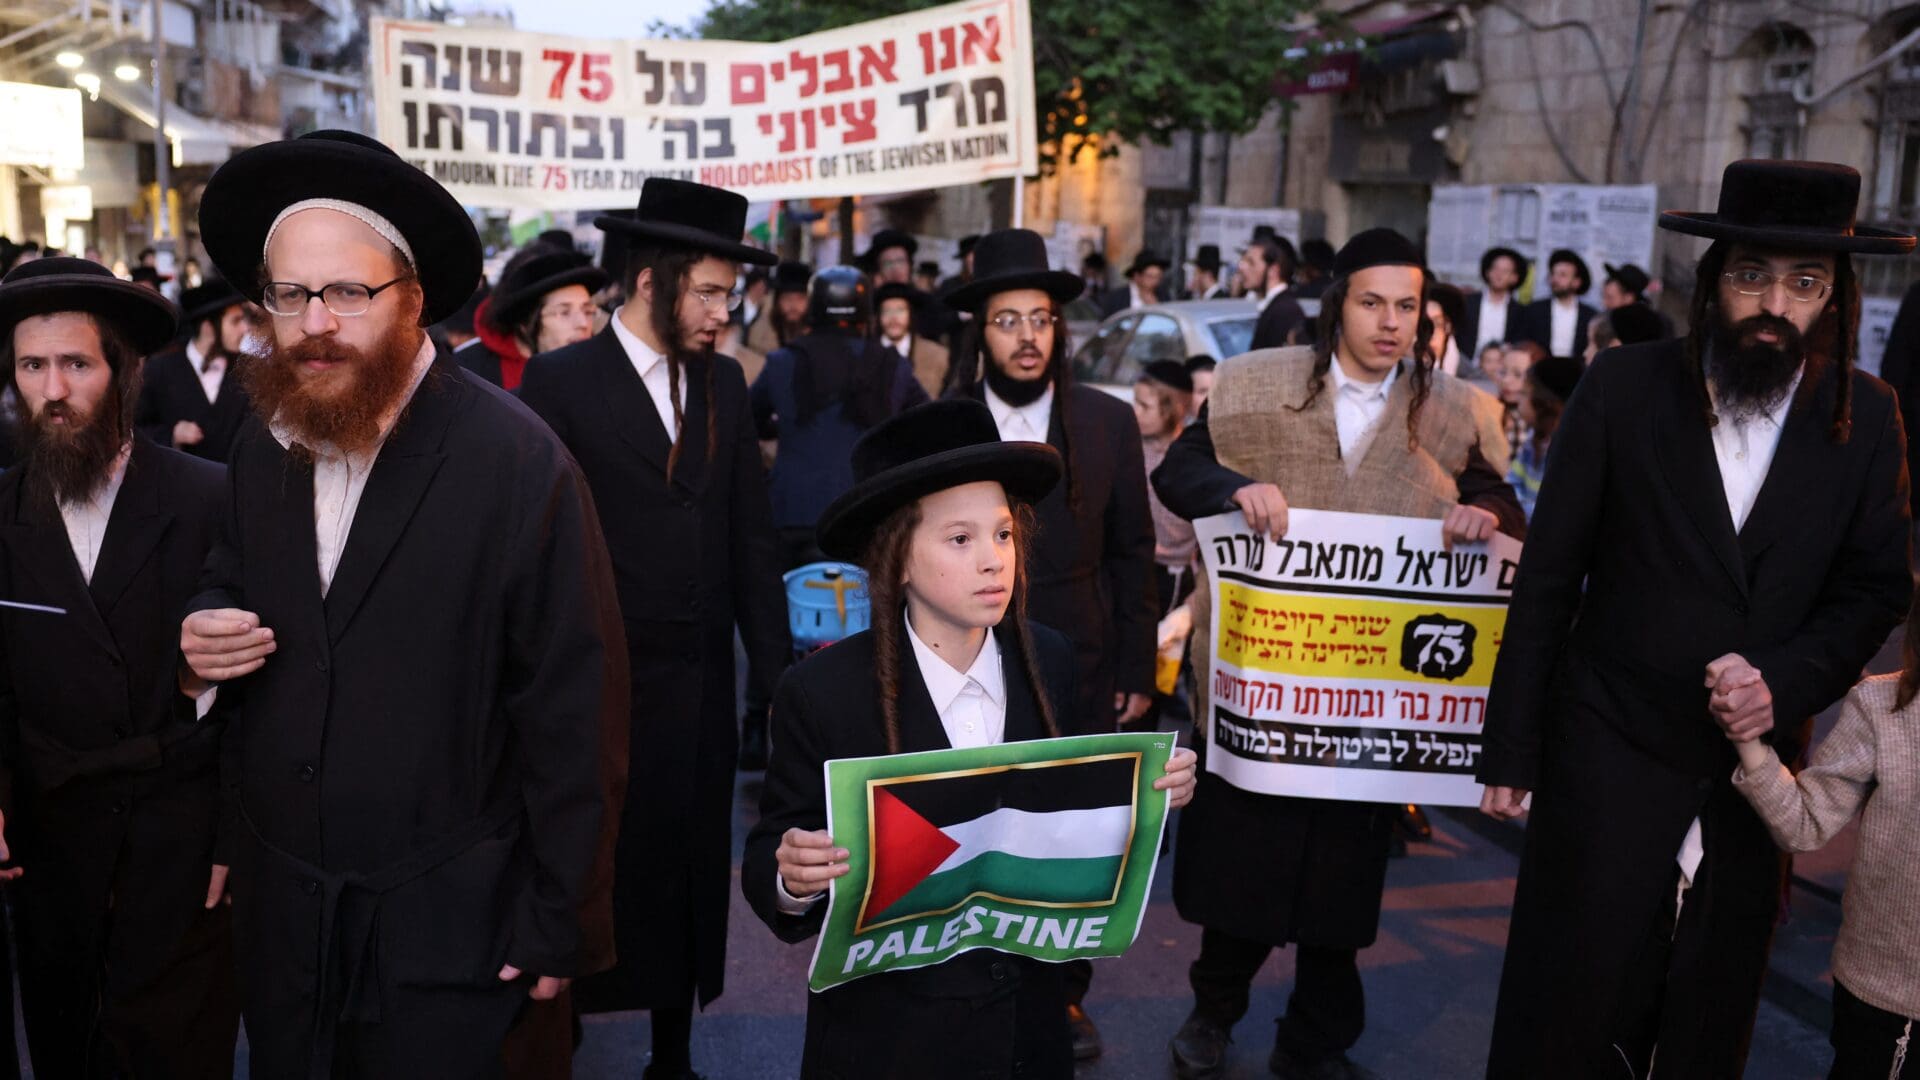 A boy holds a Palestinian sign as members of the Neturei Karta, an international organization of anti-Zionist Orthodox Jews, protest against the State of Israel on 26 April 2023.